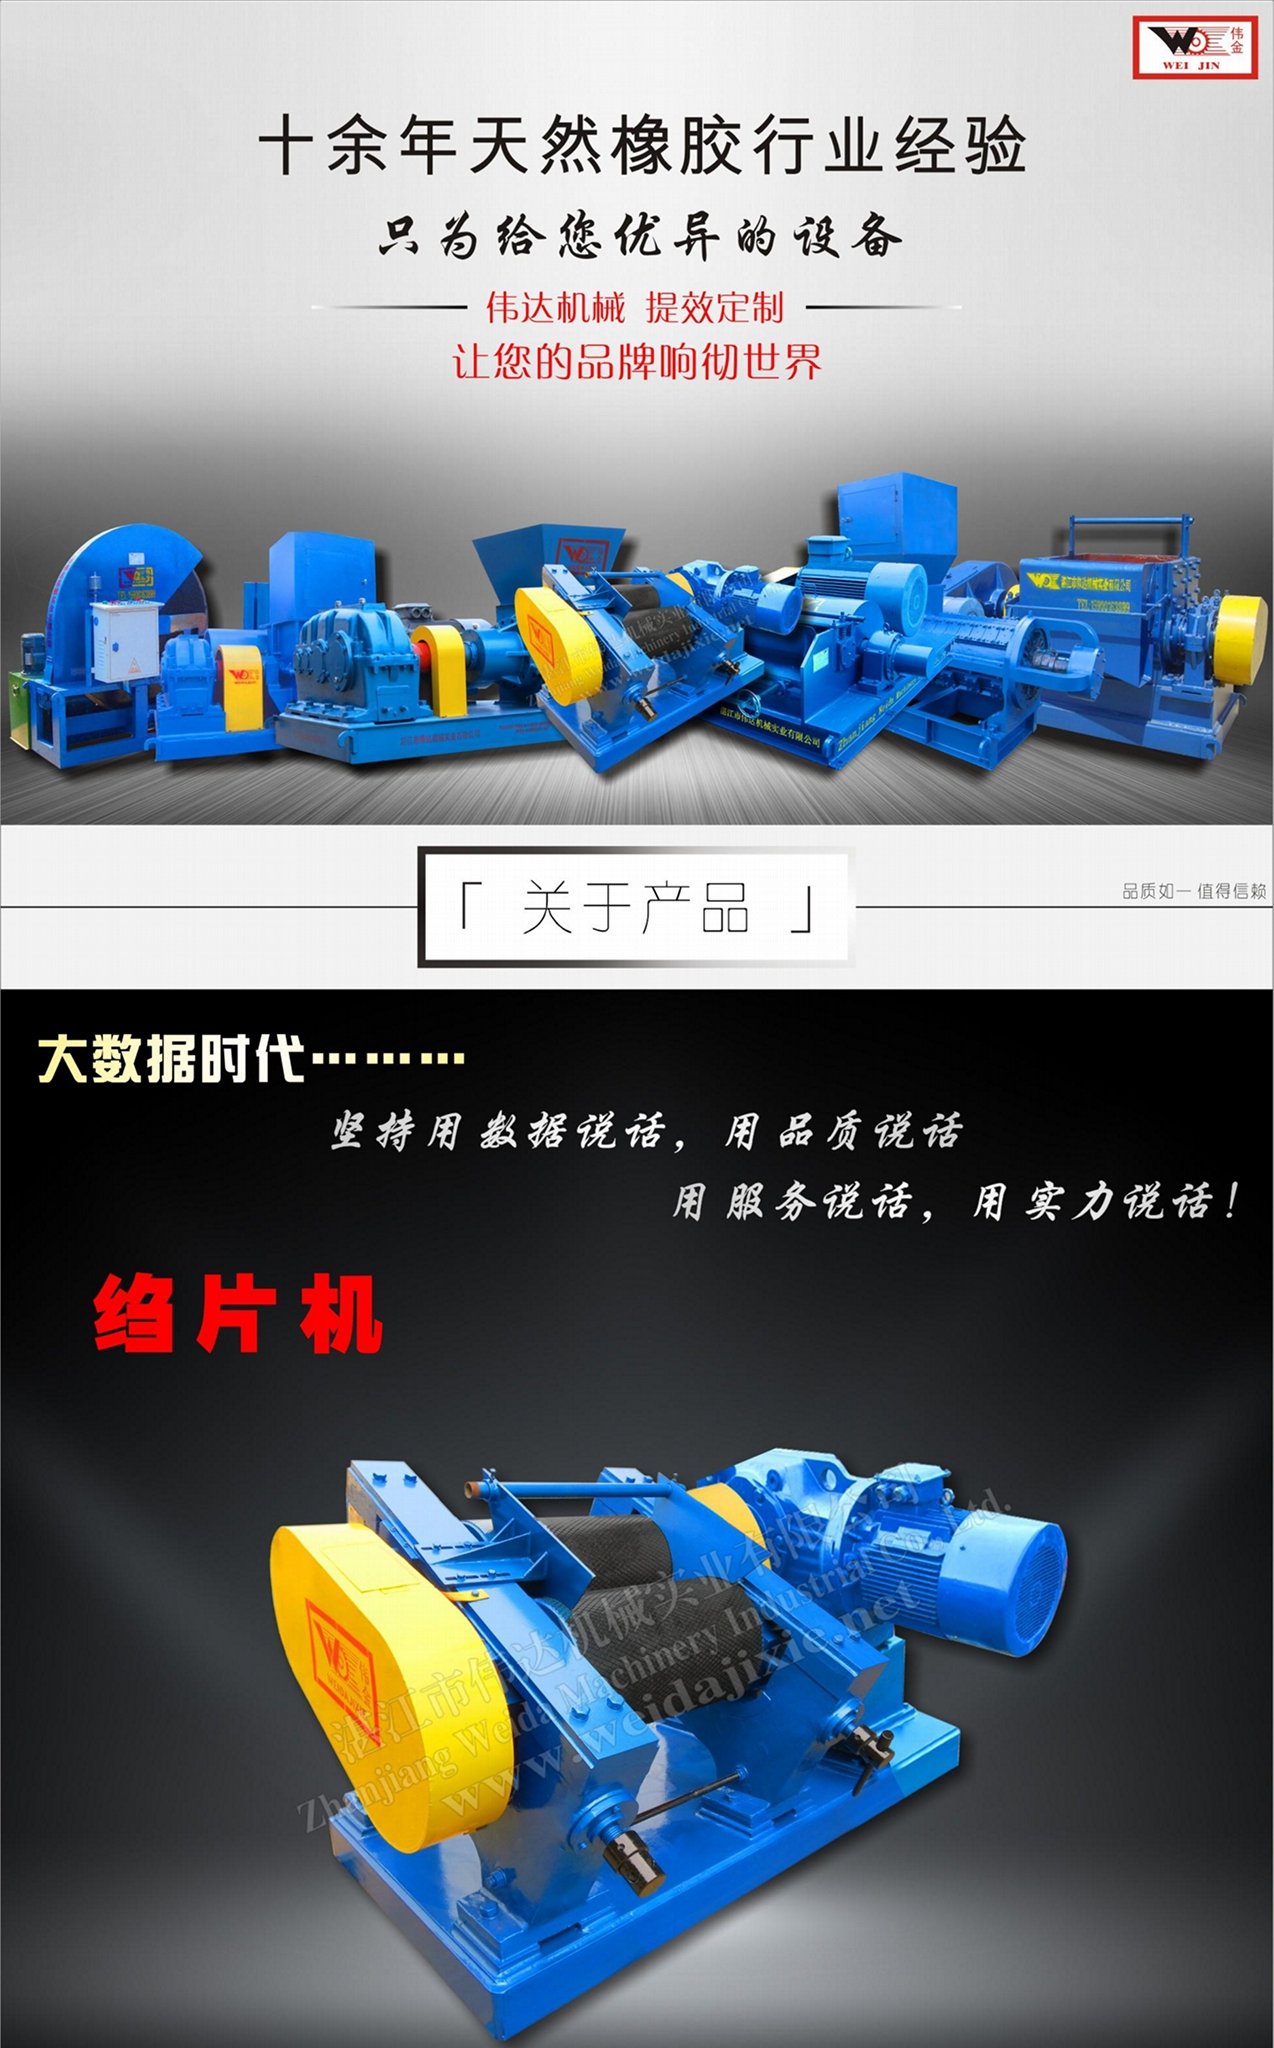 Hainan washing rubber materials automatic creper Weijin brand Affordable price 2